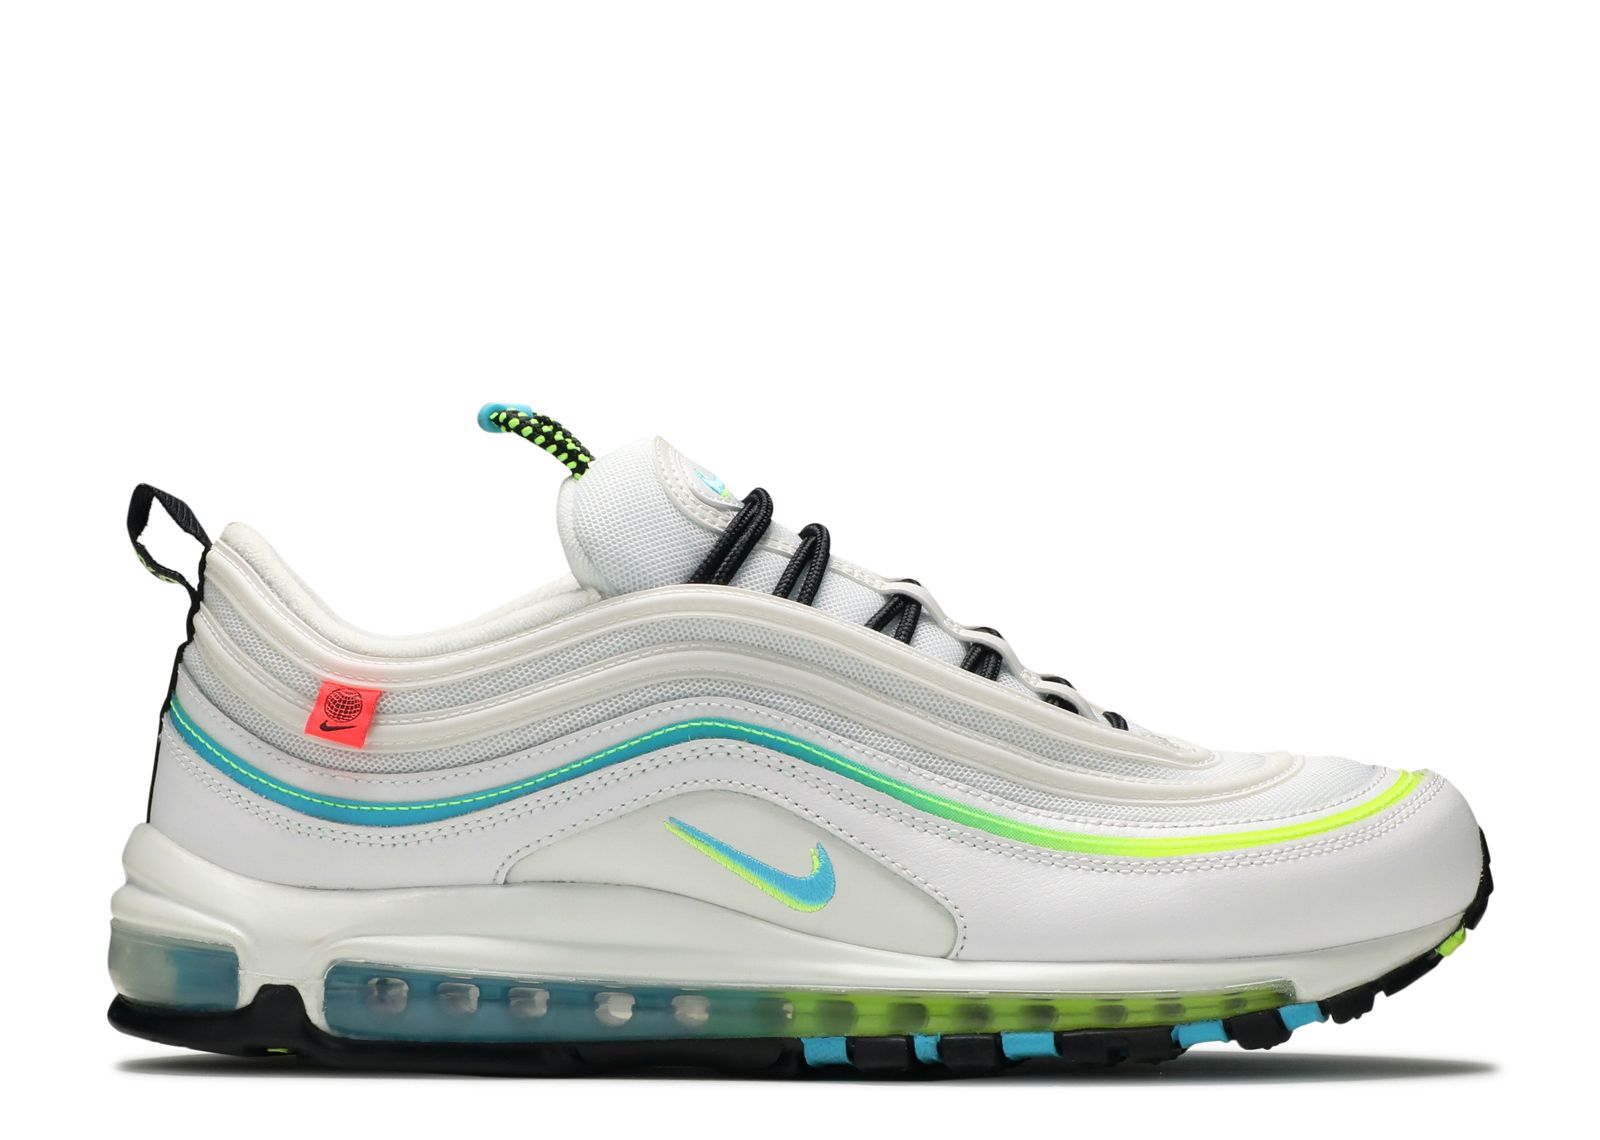 Кроссовки Nike Air Max 97 'Worldwide Pack - White', белый authentic nike air max 95 men cherry blossom worldwide pack yin yang running shoes original trainers sports sneakers runners